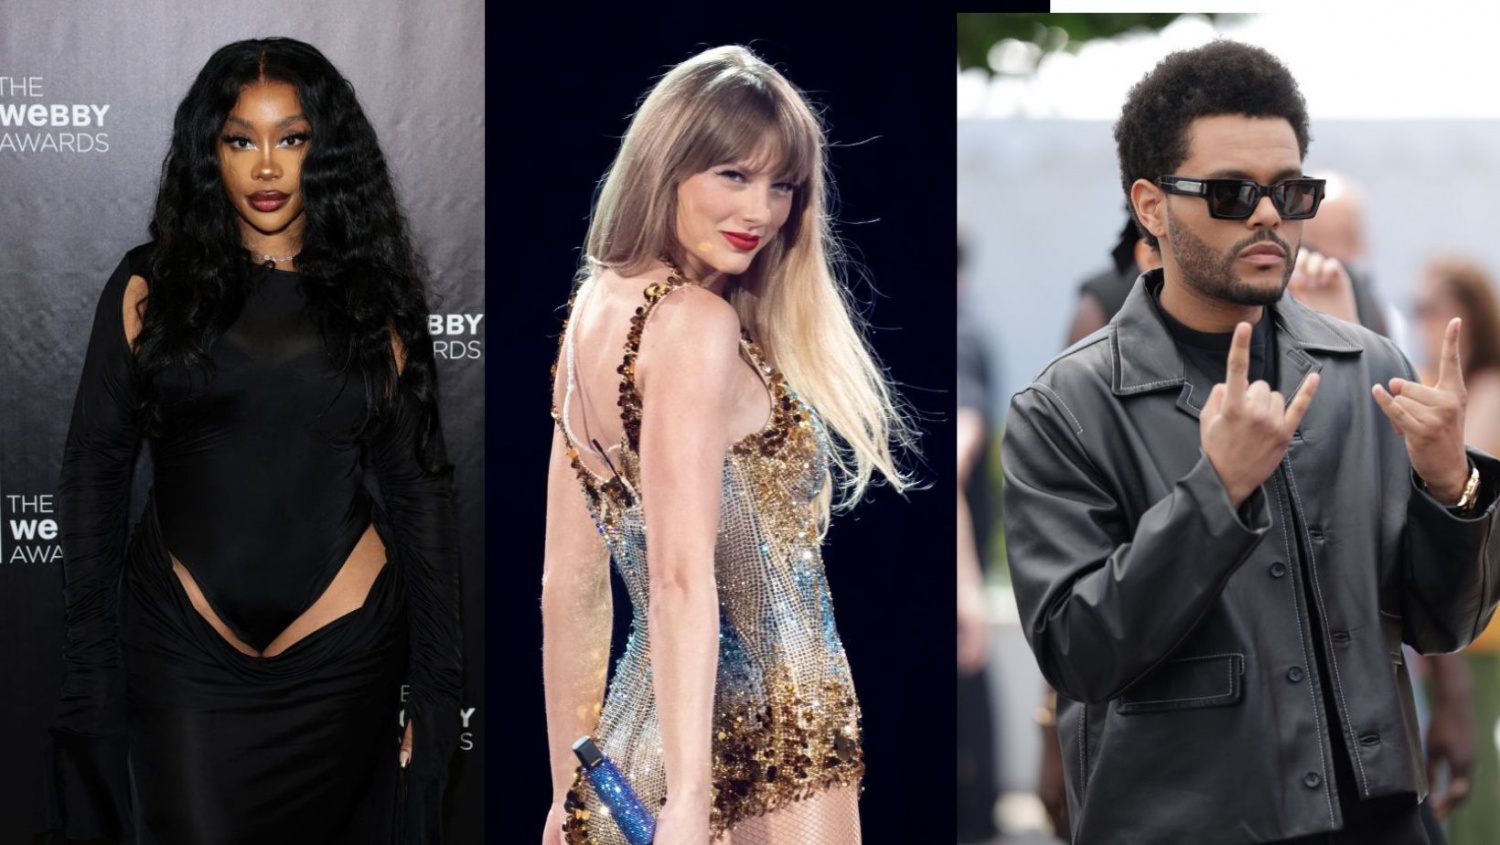 Taylor Swift, The Weeknd, SZA Named Top Artists Listened to by Students with High GPAs [REPORT]